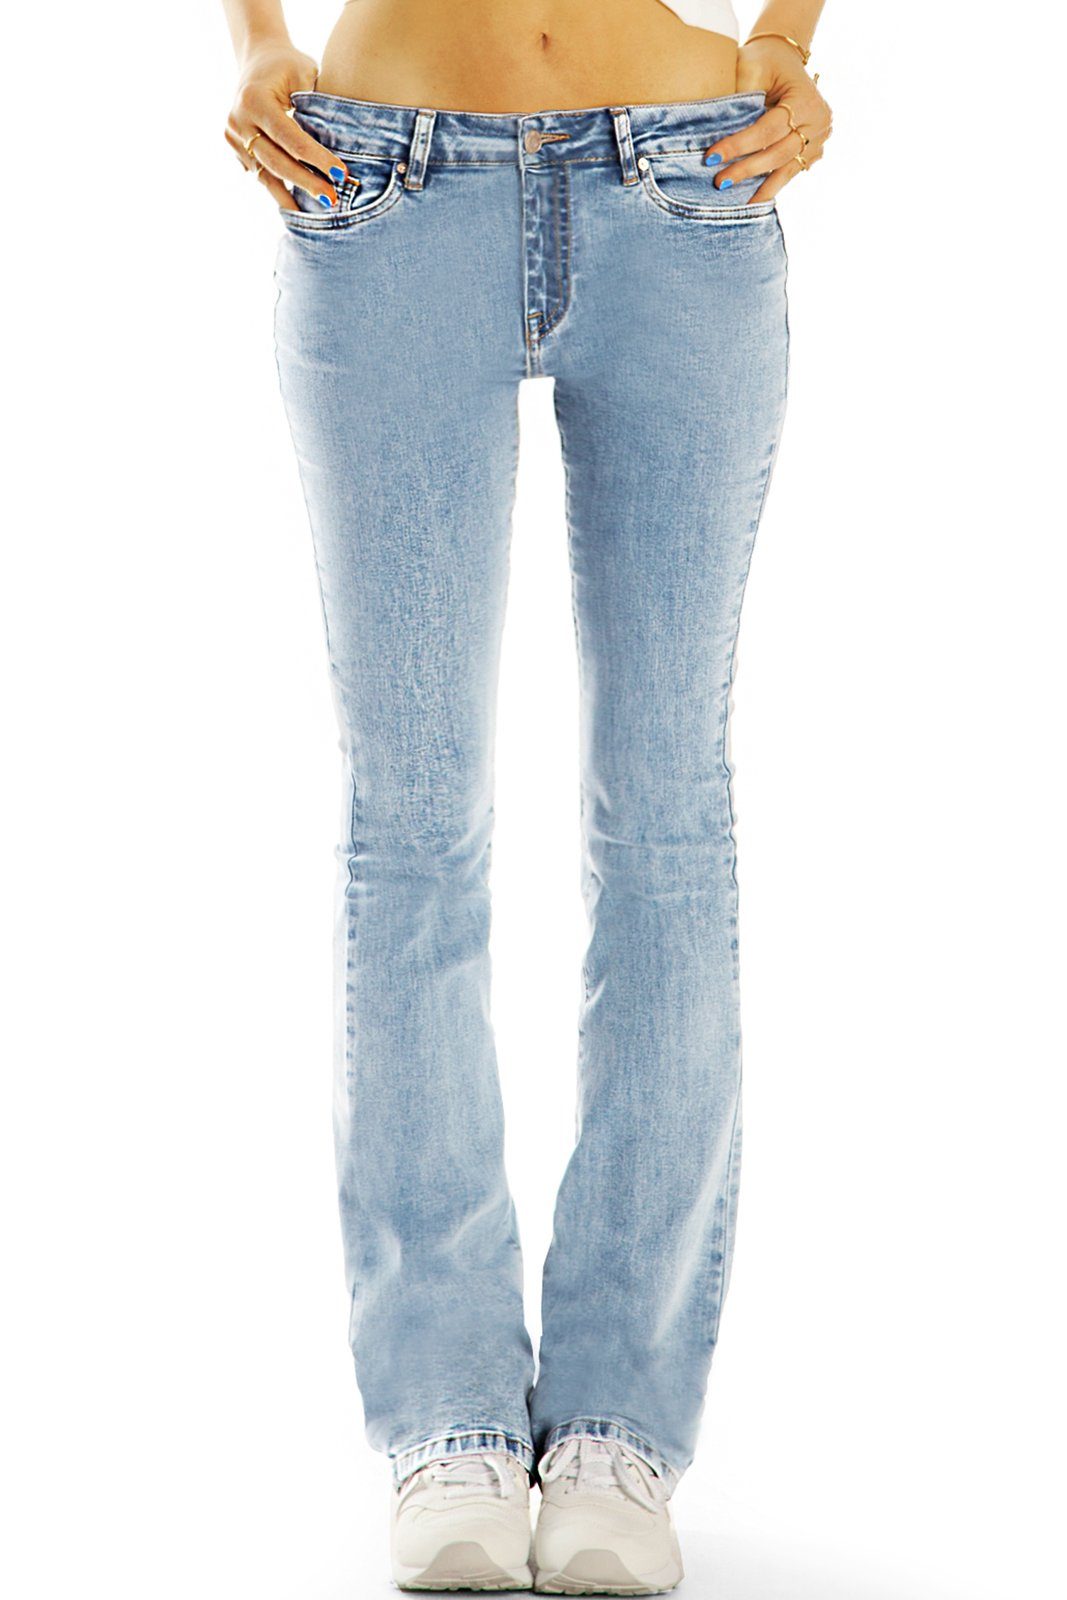 be styled Bootcut-Jeans Bootcut Stretch Jeans Hose, Schlagjeans, mid waist - j2m